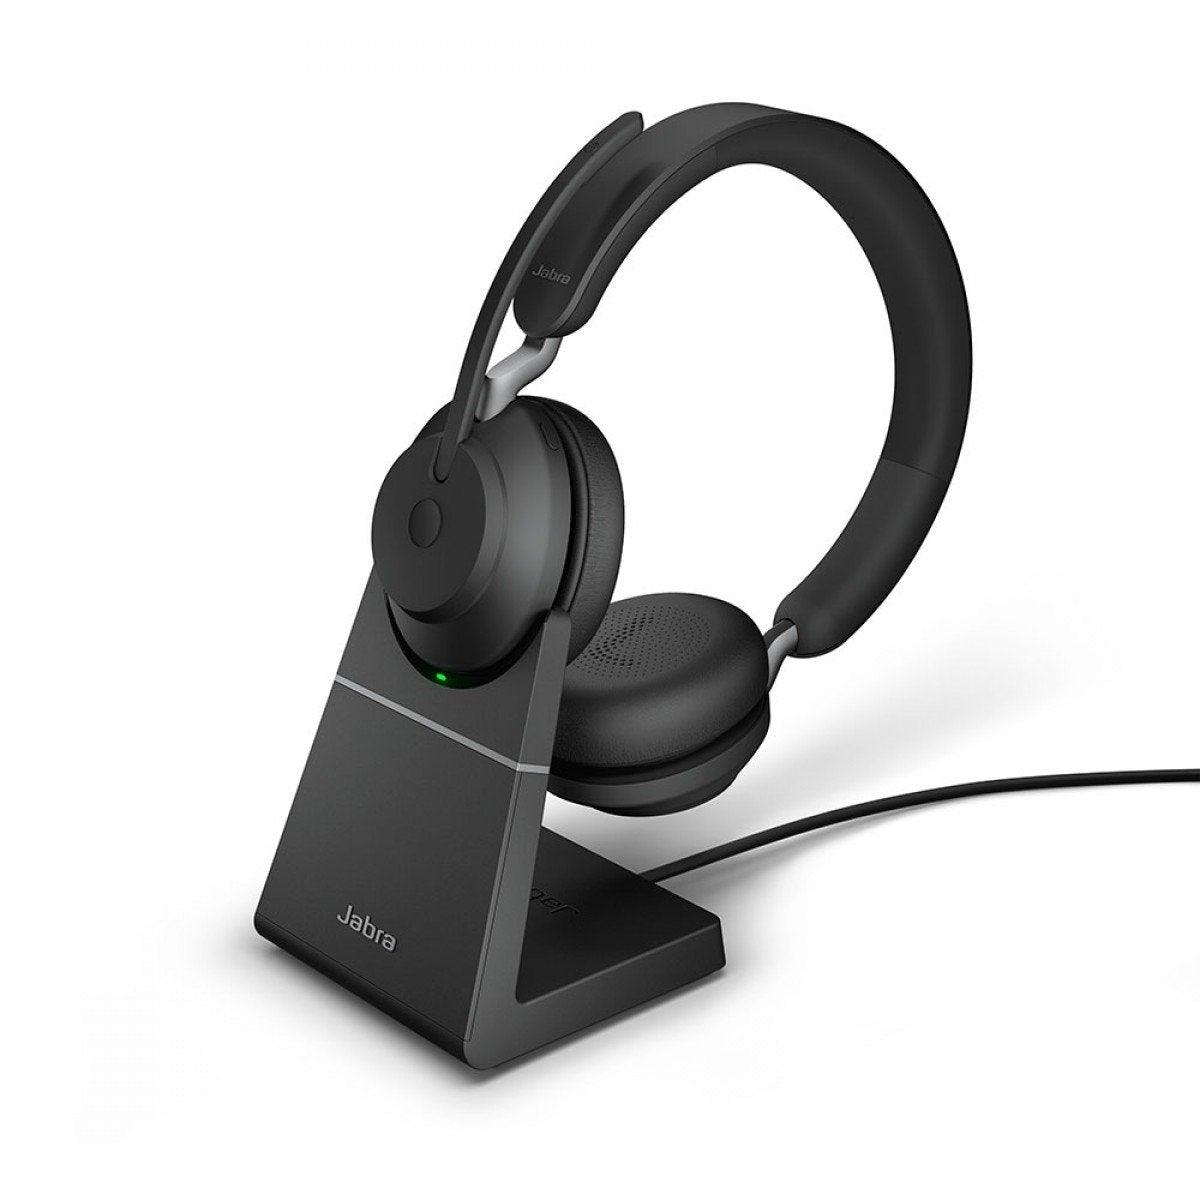 Yealink T54W Evolve2 65 Advanced Bluetooth Headset - Headsets4business